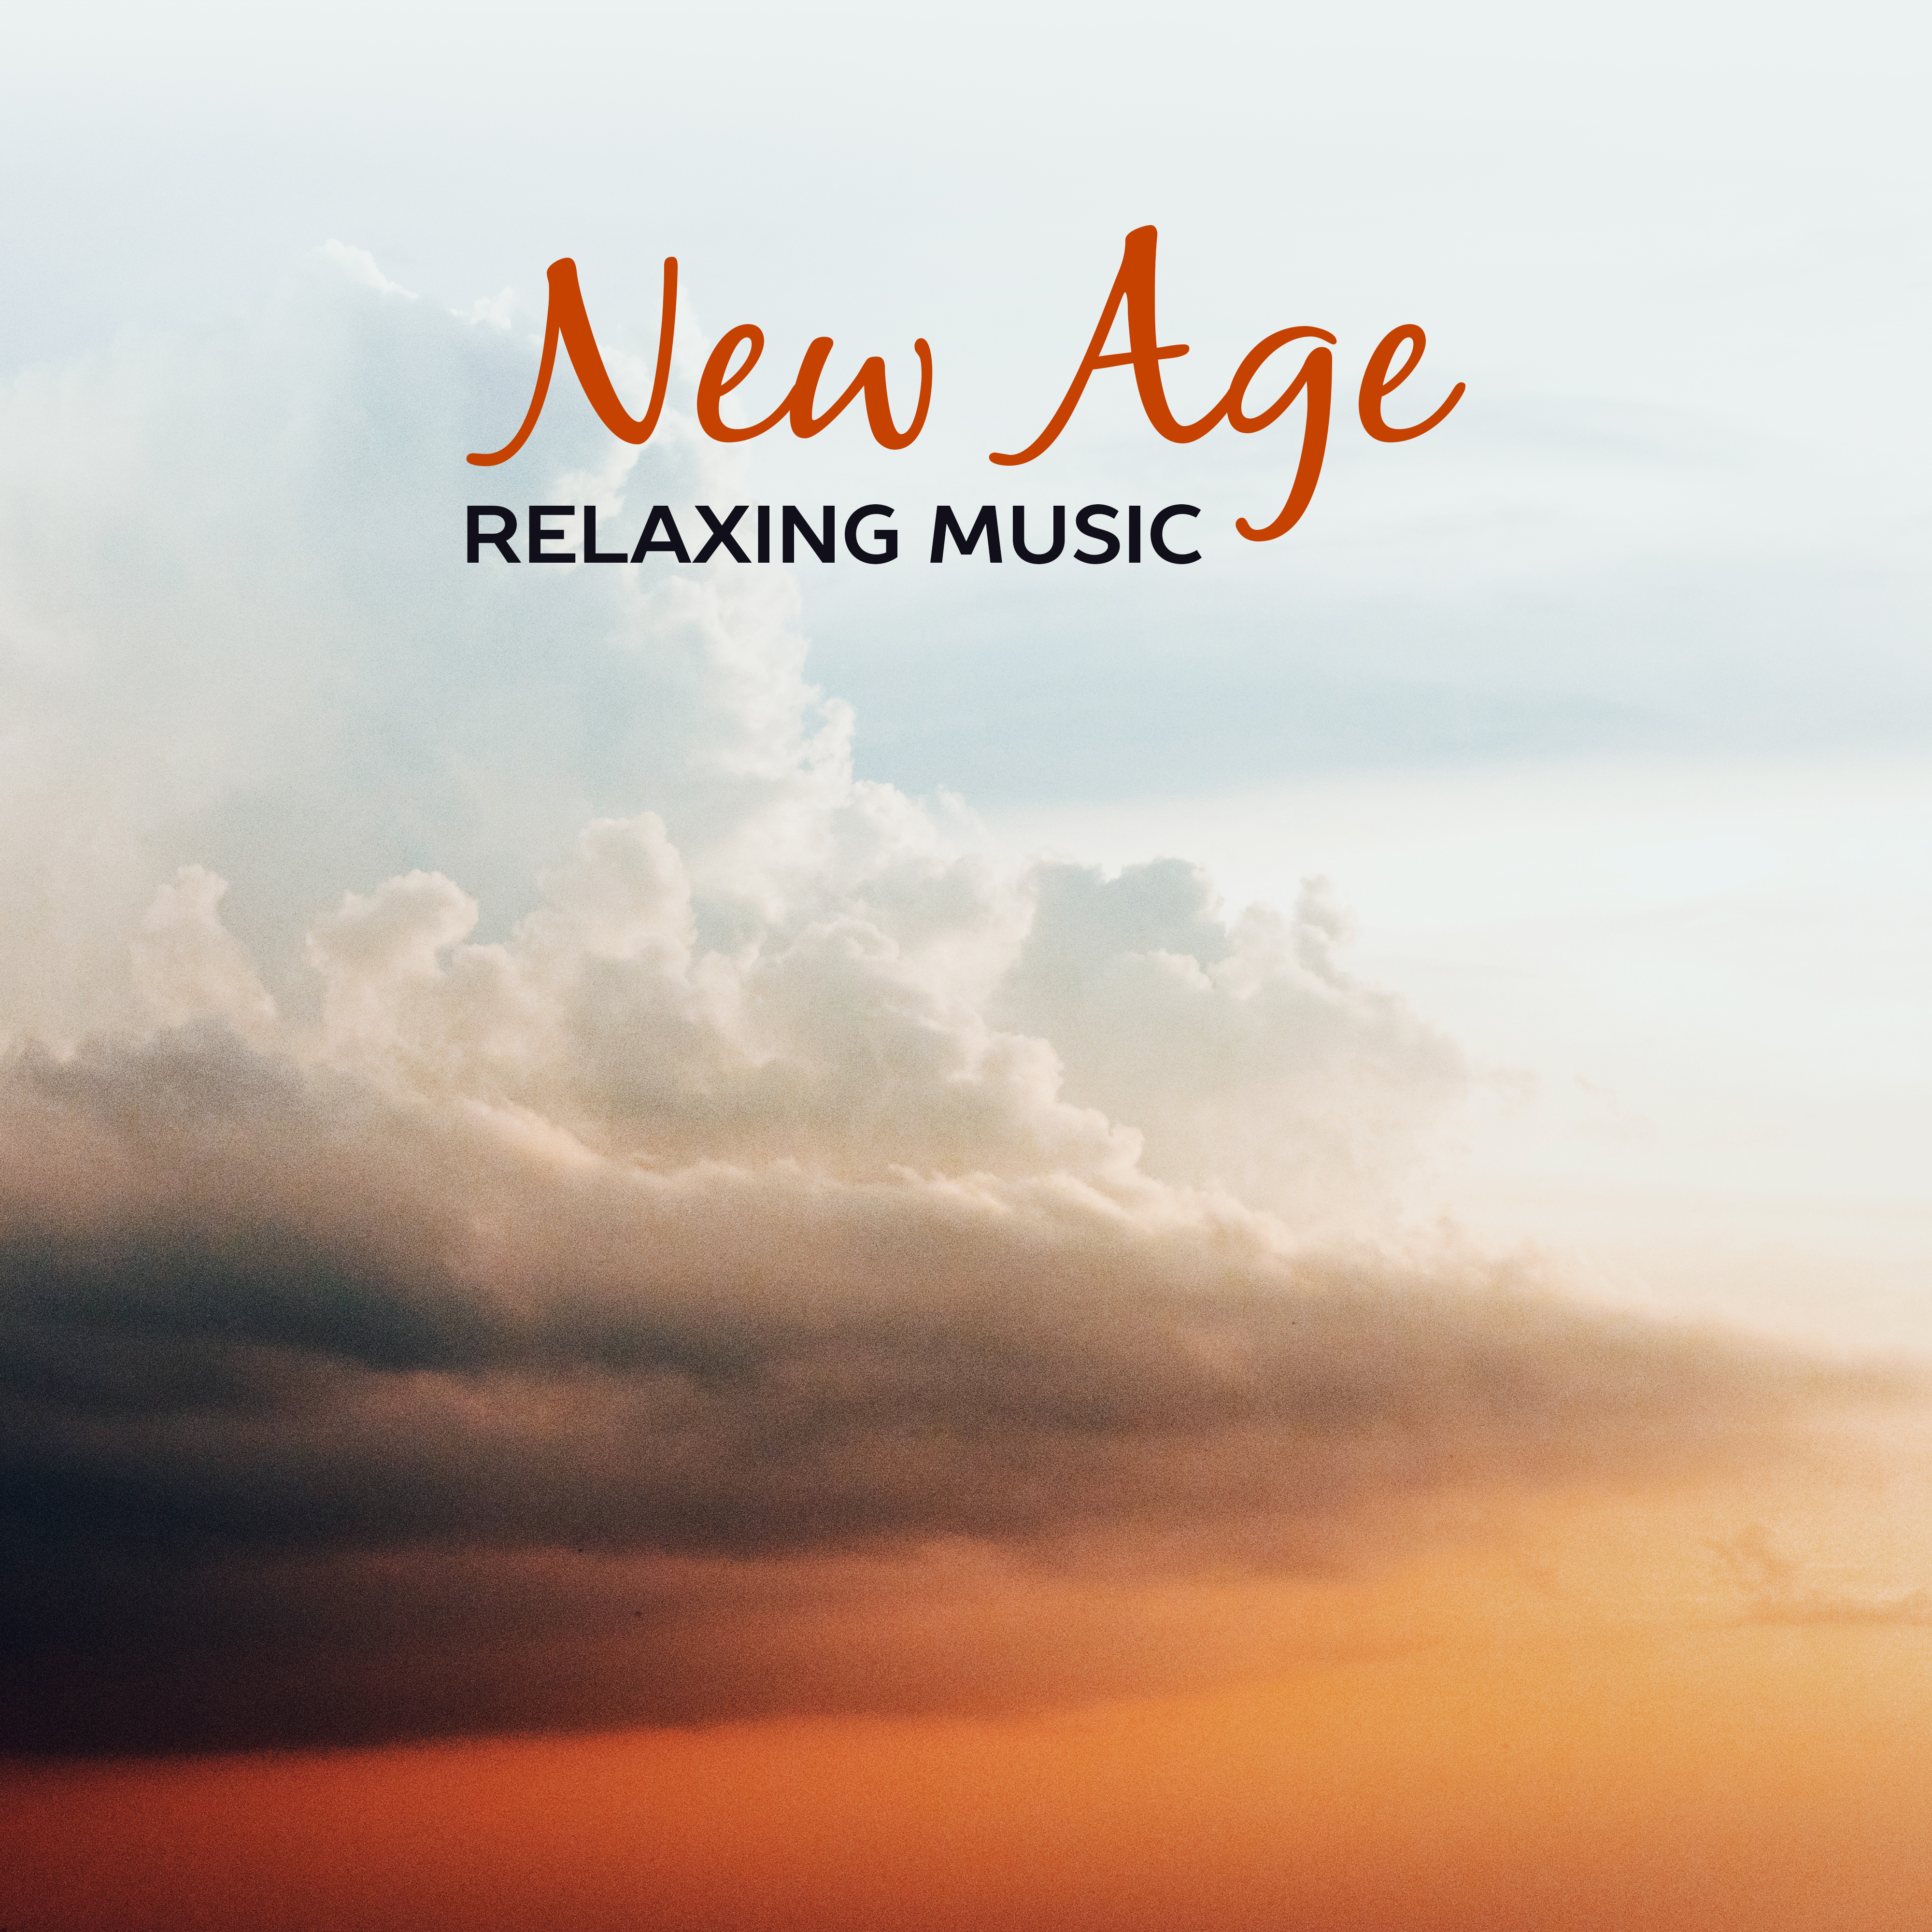 New Age Relaxing Music – Chilled Sounds, Easy Listening, Stress Relief, New Age Calmness